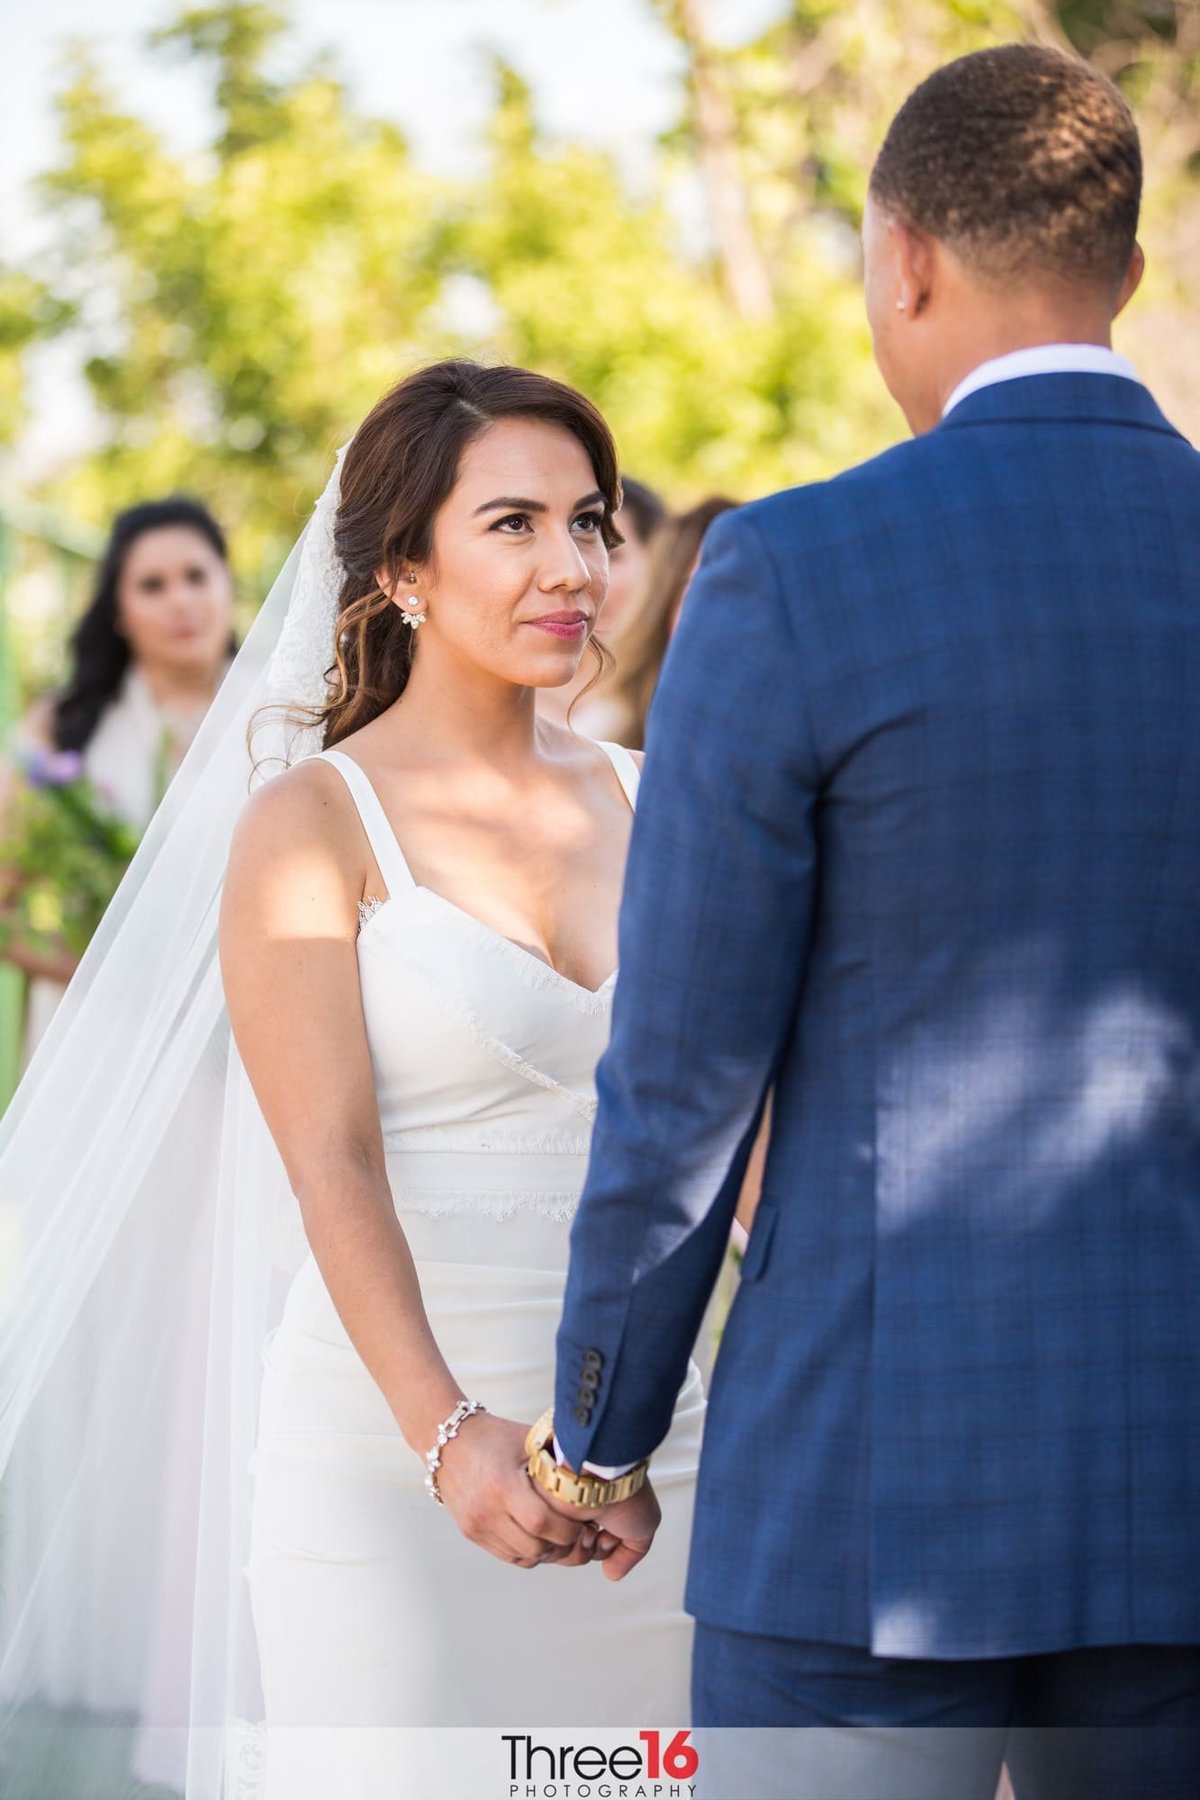 Bride looks at her Groom during the ceremony